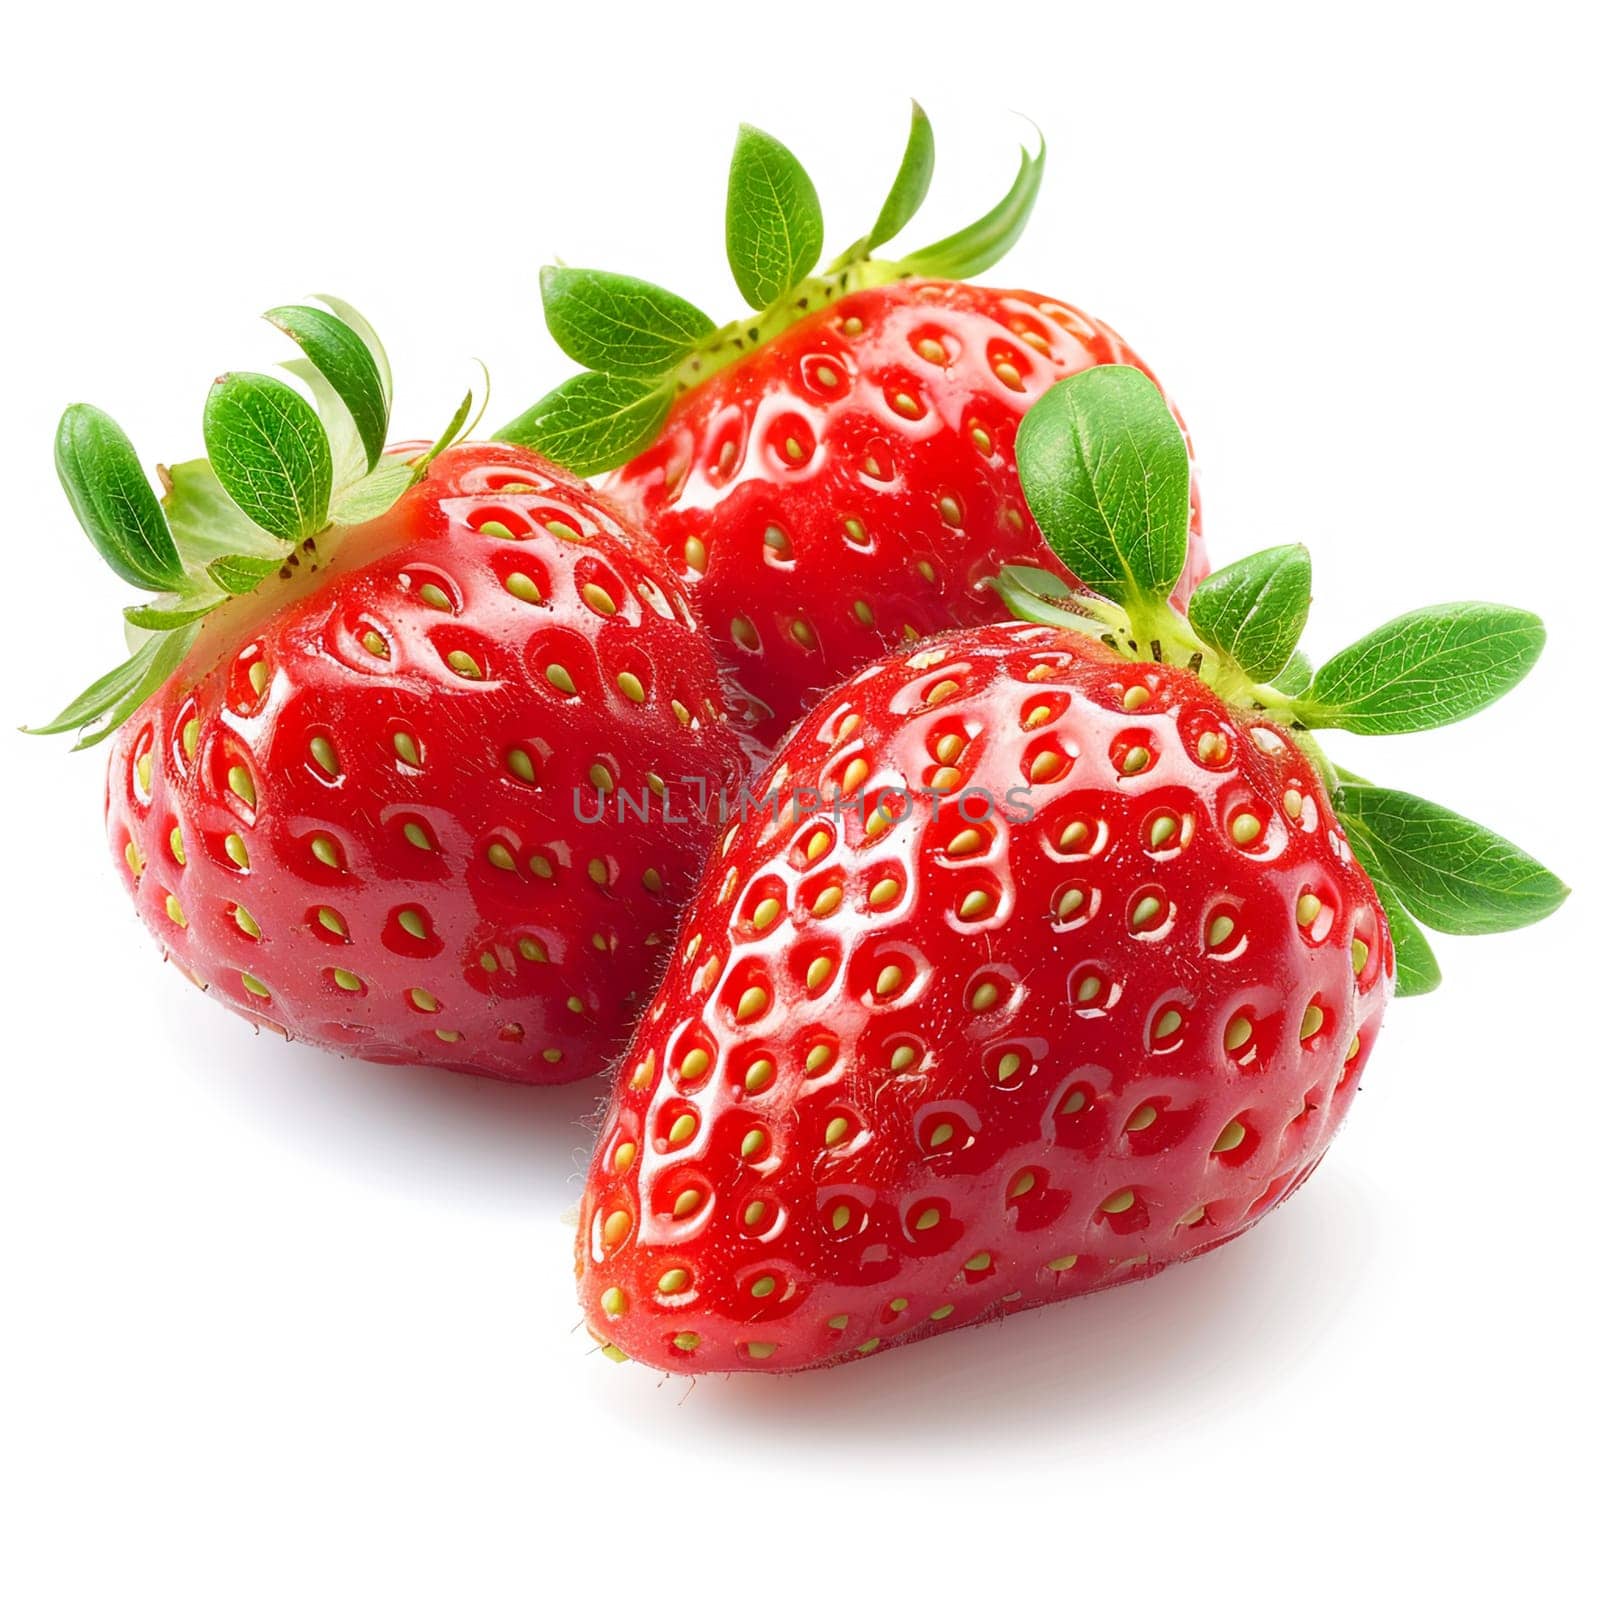 Close-up image of fresh, ripe strawberries with vibrant red color and green leaves, isolated on white background, perfect for food concepts.